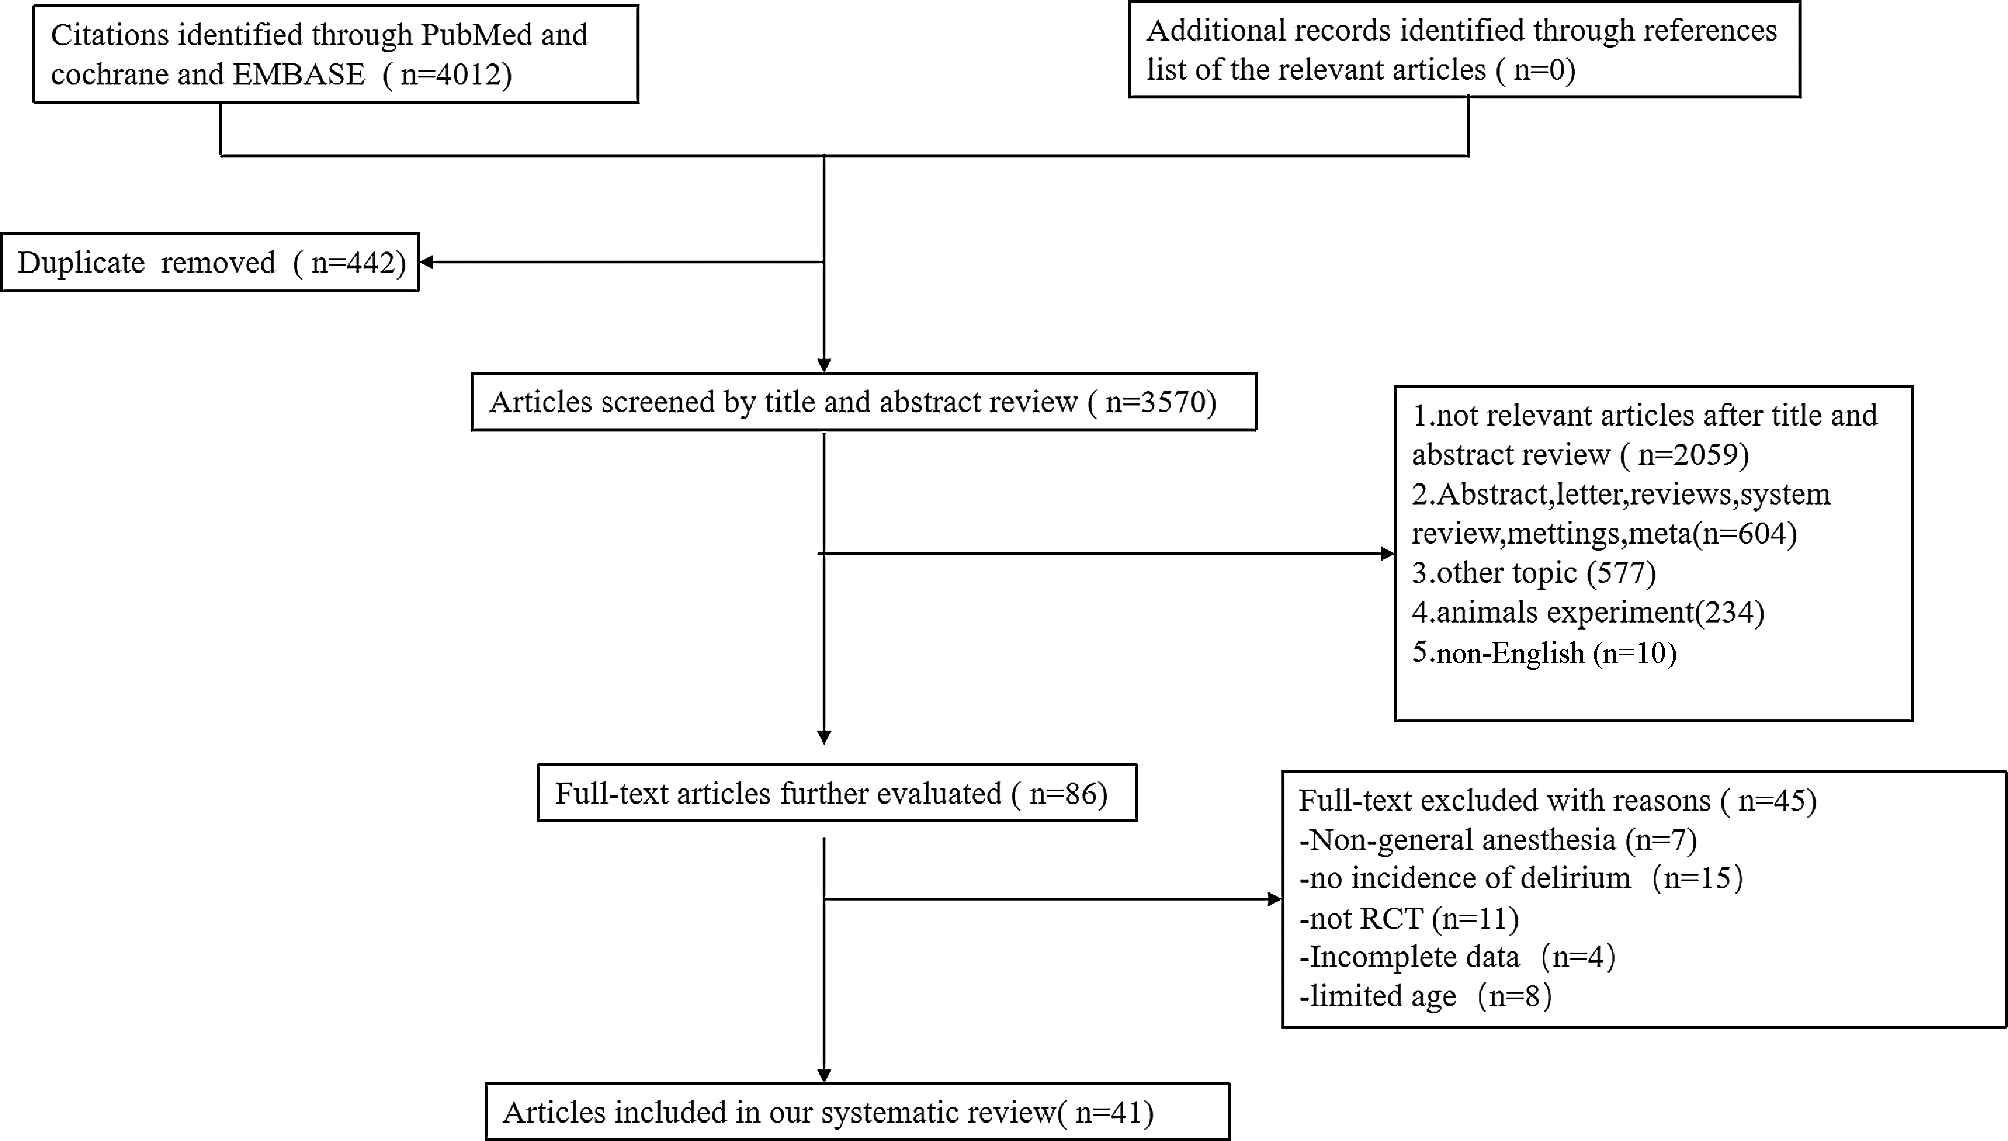 The role of perioperative sedative anesthetics in preventing postoperative delirium: a systematic review and network-meta analysis including 6679 patients